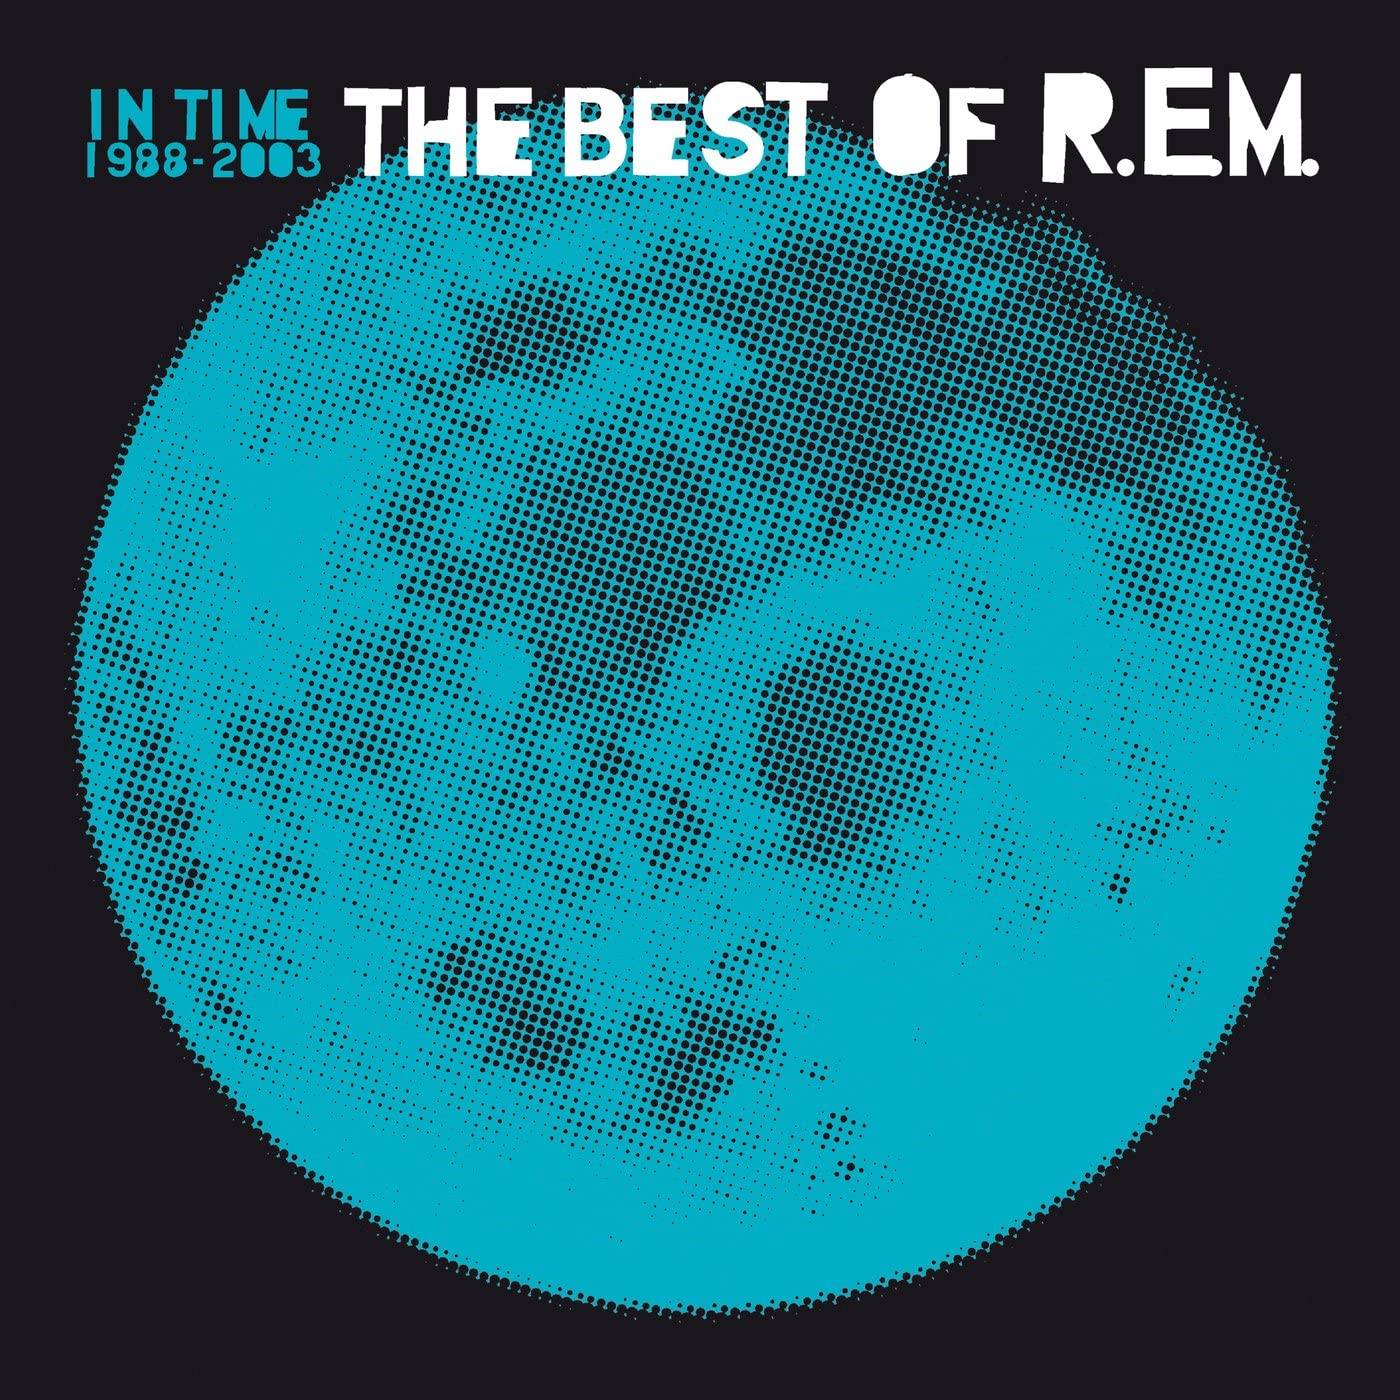 R.E.M./In Time: The Best of 1988-2003 [LP]